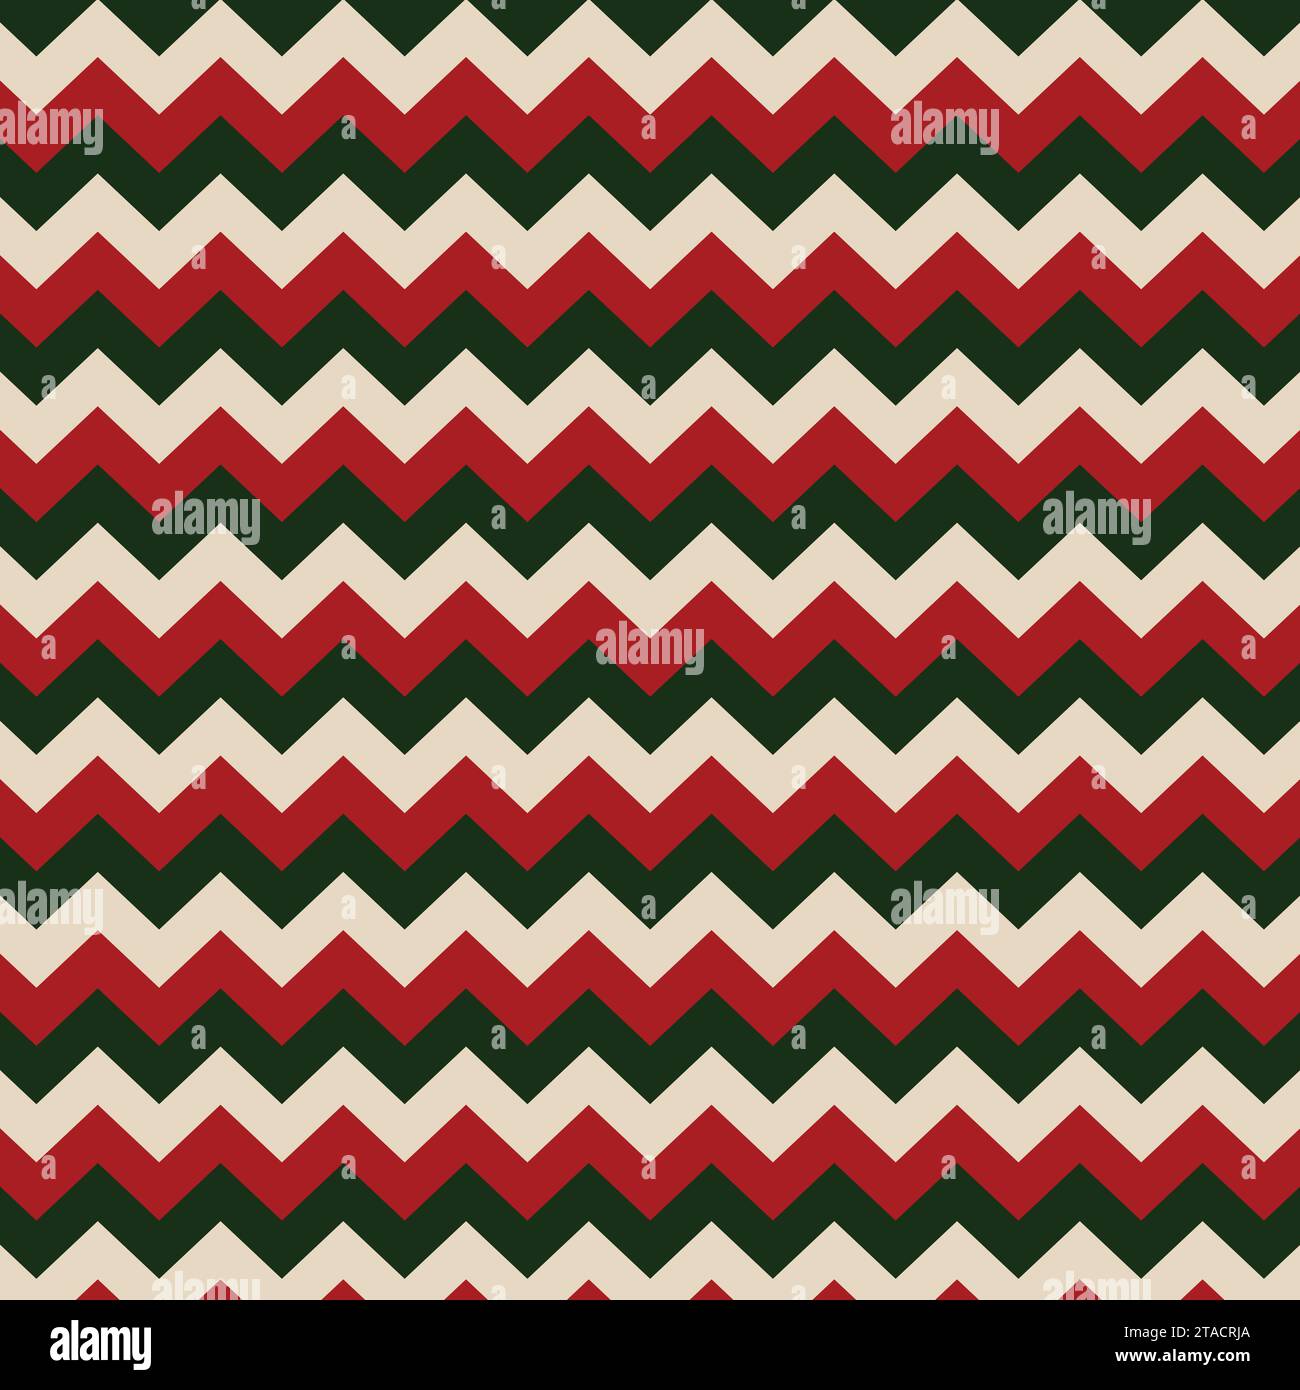 Christmas pattern chevron design wallpaper. Red, green and beige color zigzag pattern. Stock Vector